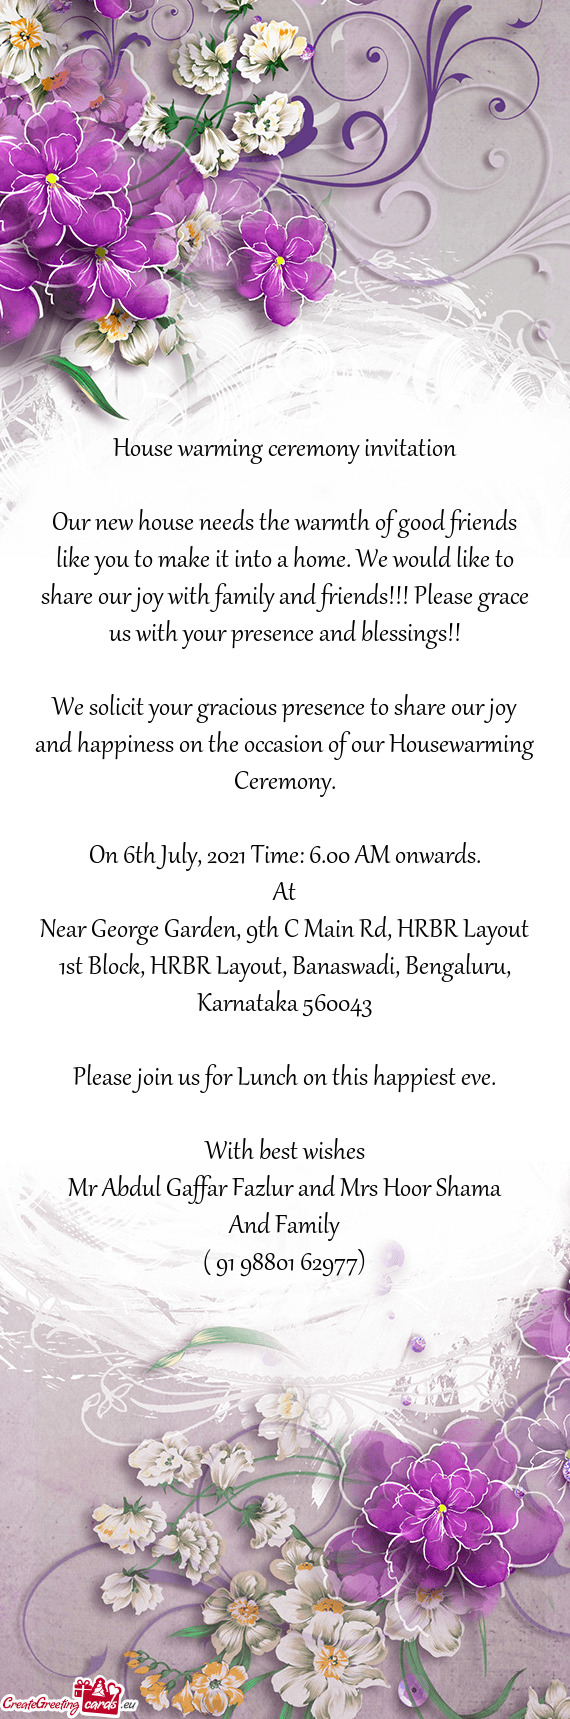 We solicit your gracious presence to share our joy and happiness on the occasion of our Housewarming